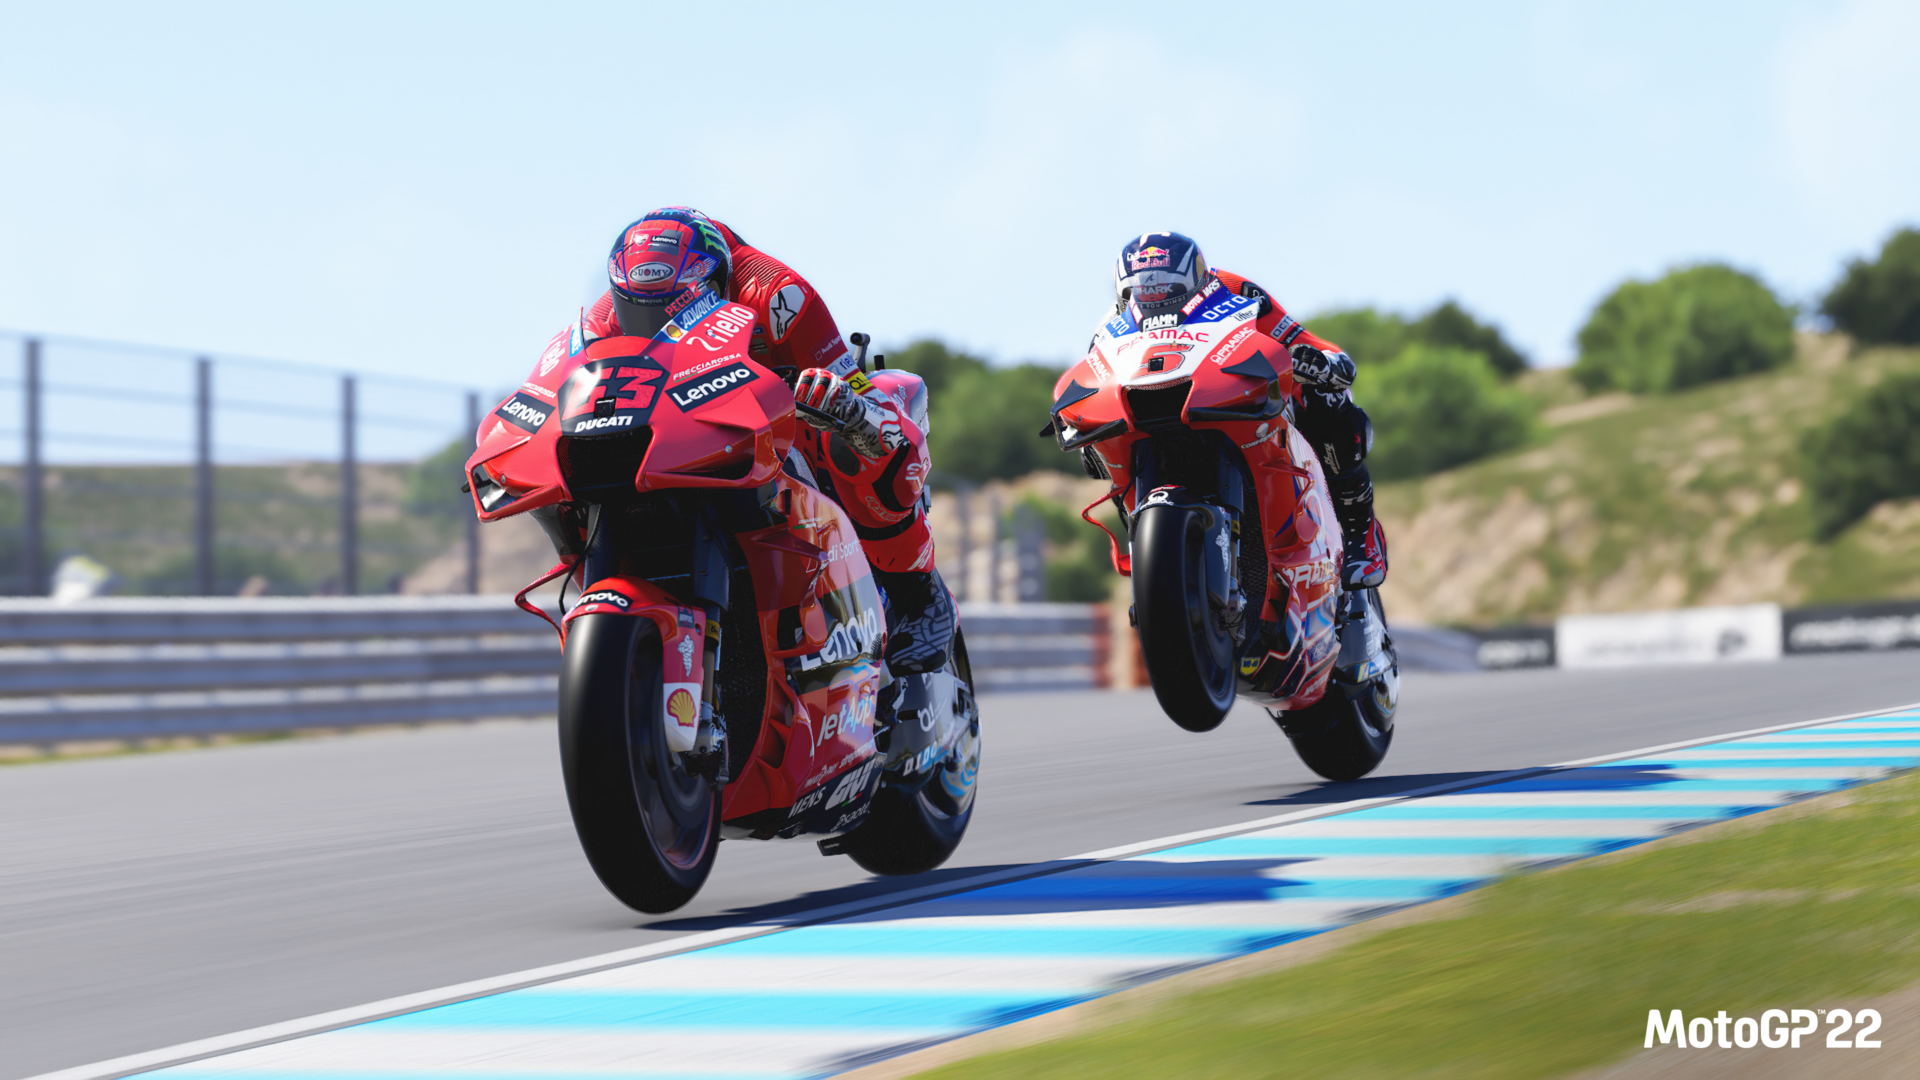 Motogp 22. MOTOGP 22 игра. MOTOGP 22 ps5. Ps4 MOTOGP 22. MOTOGP 22 ps5 Gameplay.